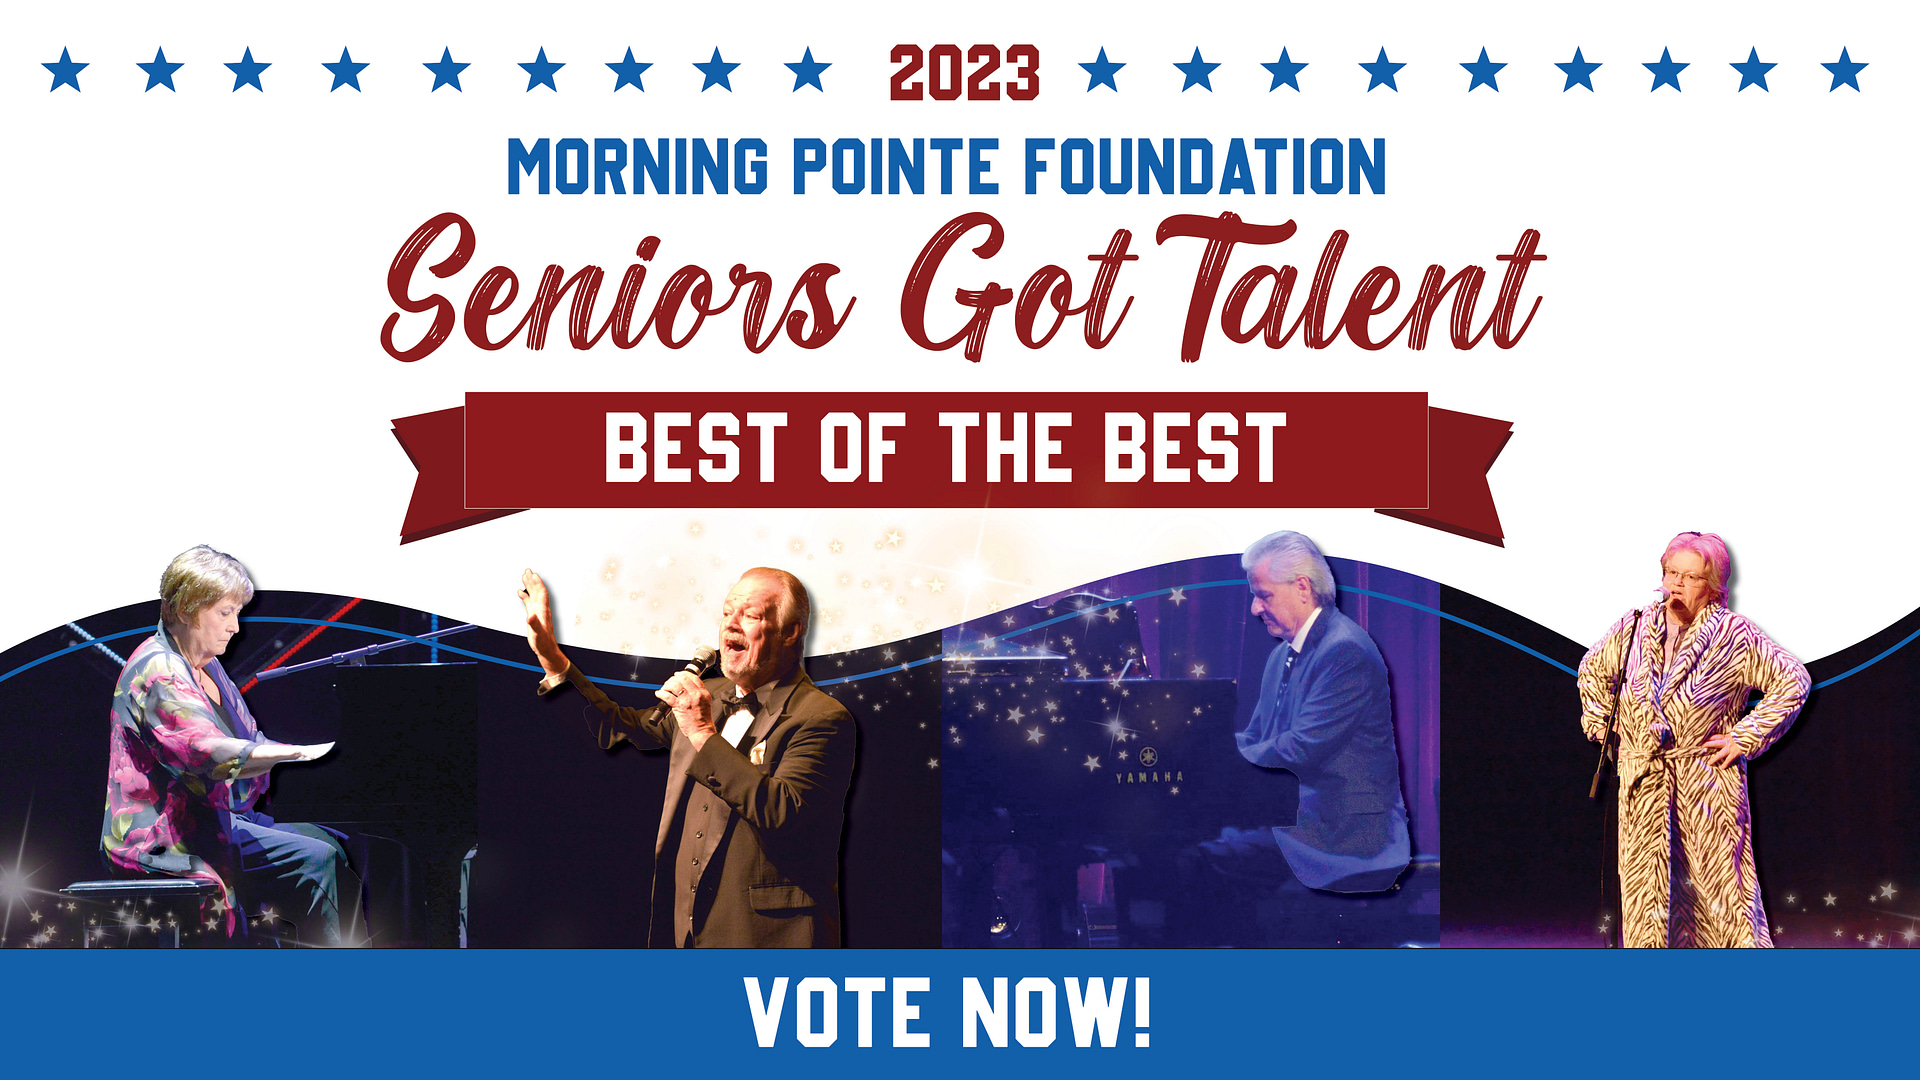 Morning Pointe Foundation Seniors Got Talent Best of the Best Vote Now